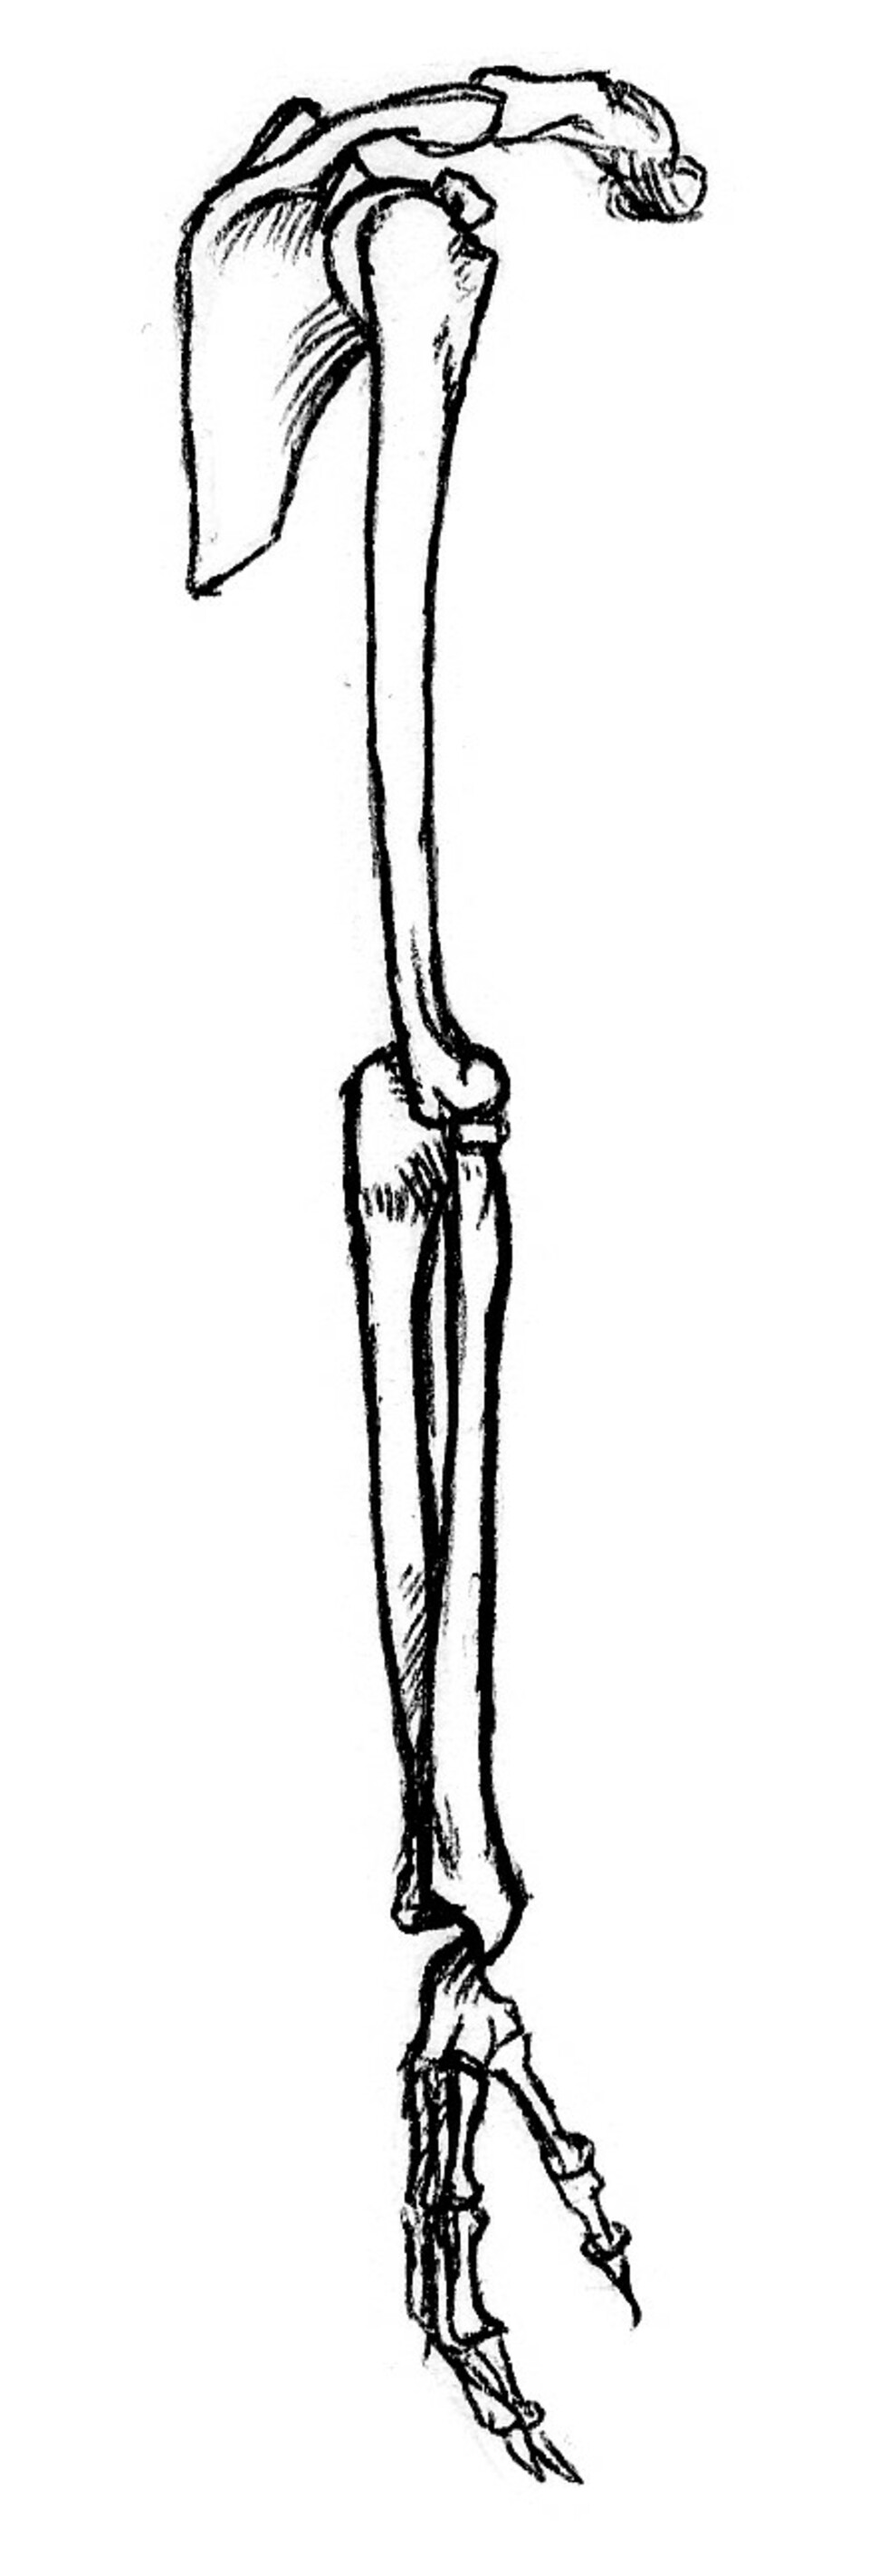 outside view of bones of right arm, supinated